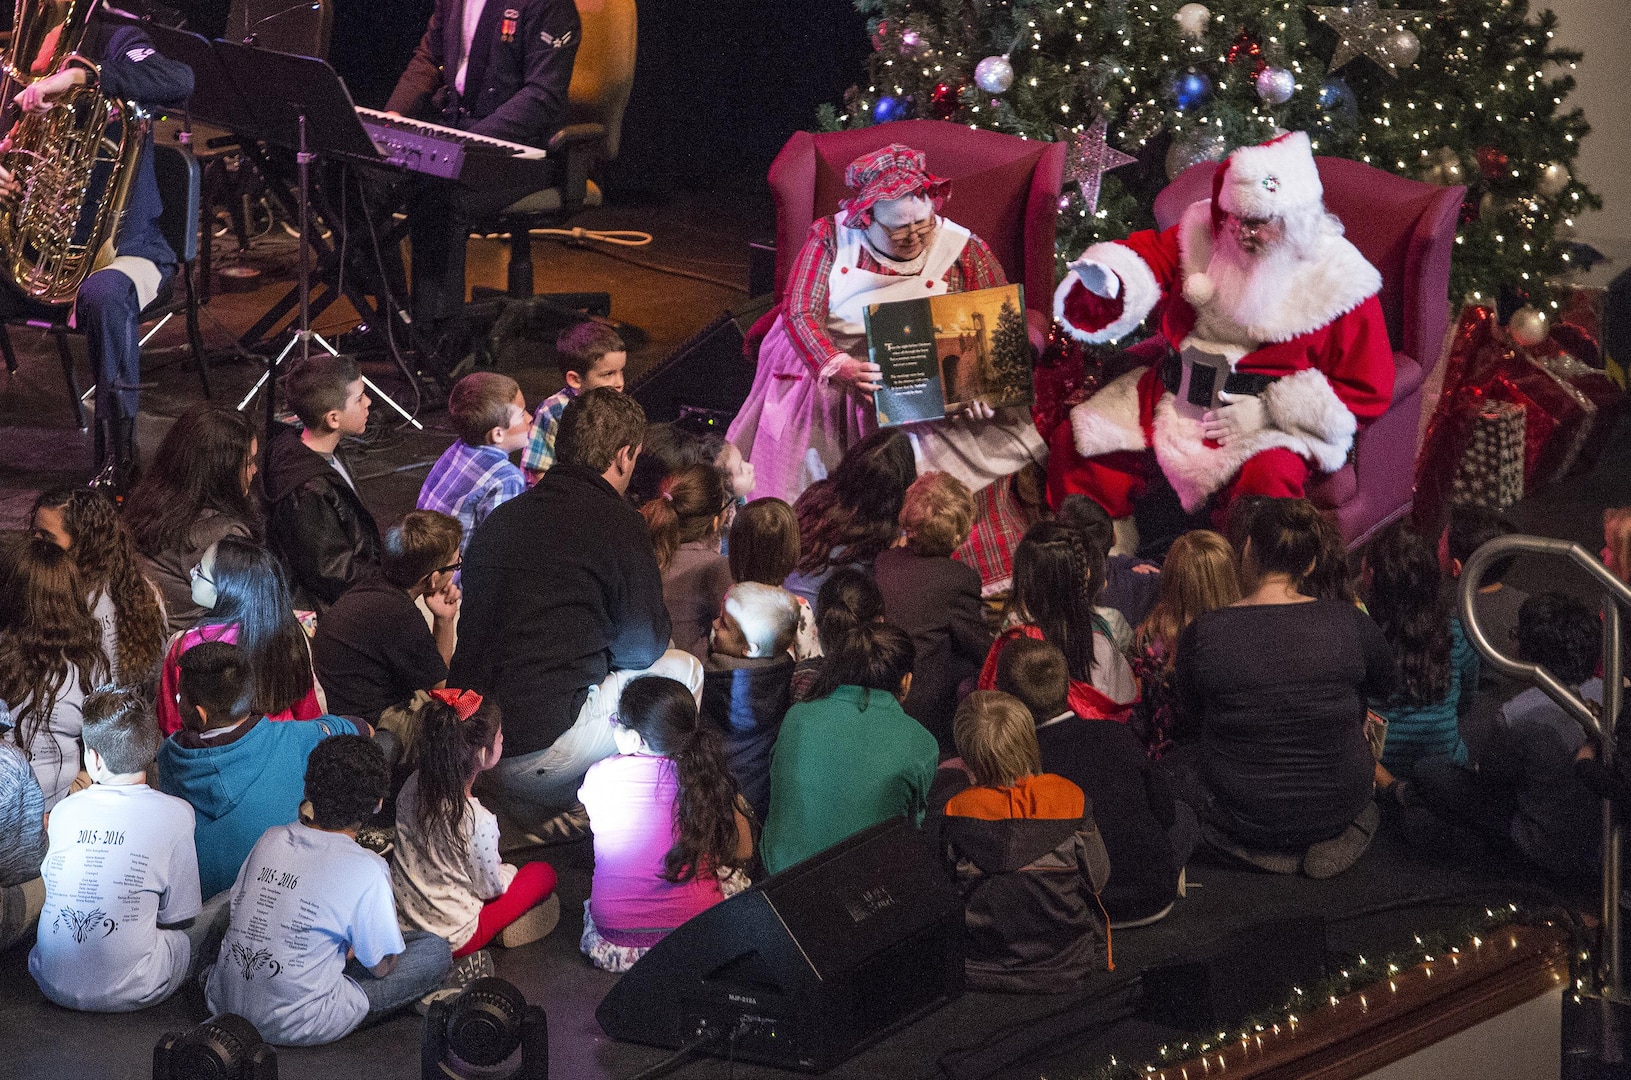 Santa and Mrs. Clause display a childrens book while United States Air Force Band of the West perform holiday music during the Holiday in Blue concert Dec. 7, 2015 at the Edgewood Independent School District Theatre for the Performing Arts in San Antonio, Texas. The concert included a variety of holiday songs from around the world, a children’s story and a sing-a-long. Attendees included members of JBSA, community members and retirees. The Airmen assigned to the band are highly-trained professional musicians who have dedicated themselves to serving their country through music. (U.S. Air Force photo by Johnny Saldivar)